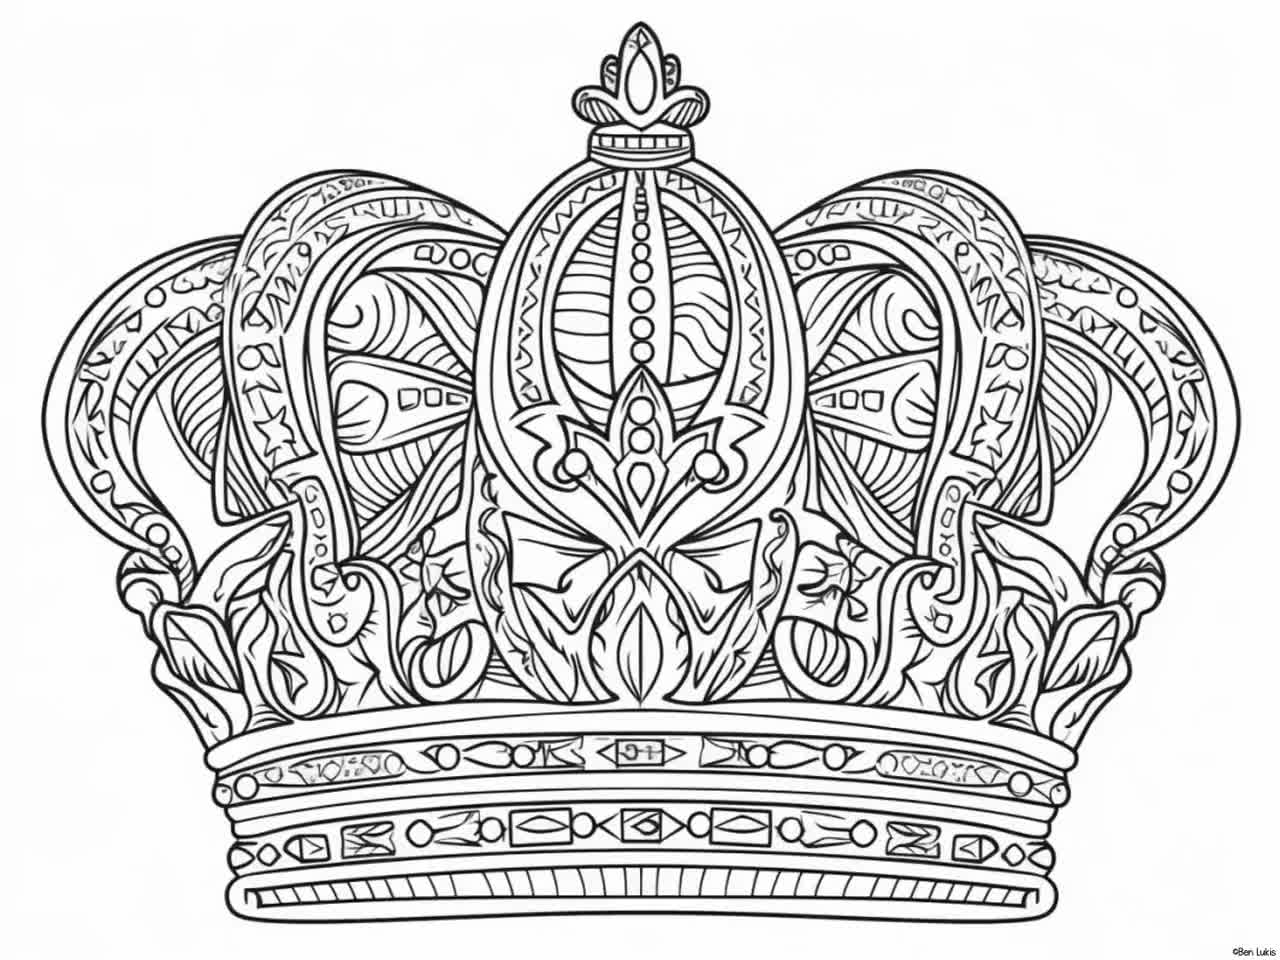 Crown coloring pages for kids and adults coronation coloring sheets crowns for a king queen prince or princess printable pdf pages